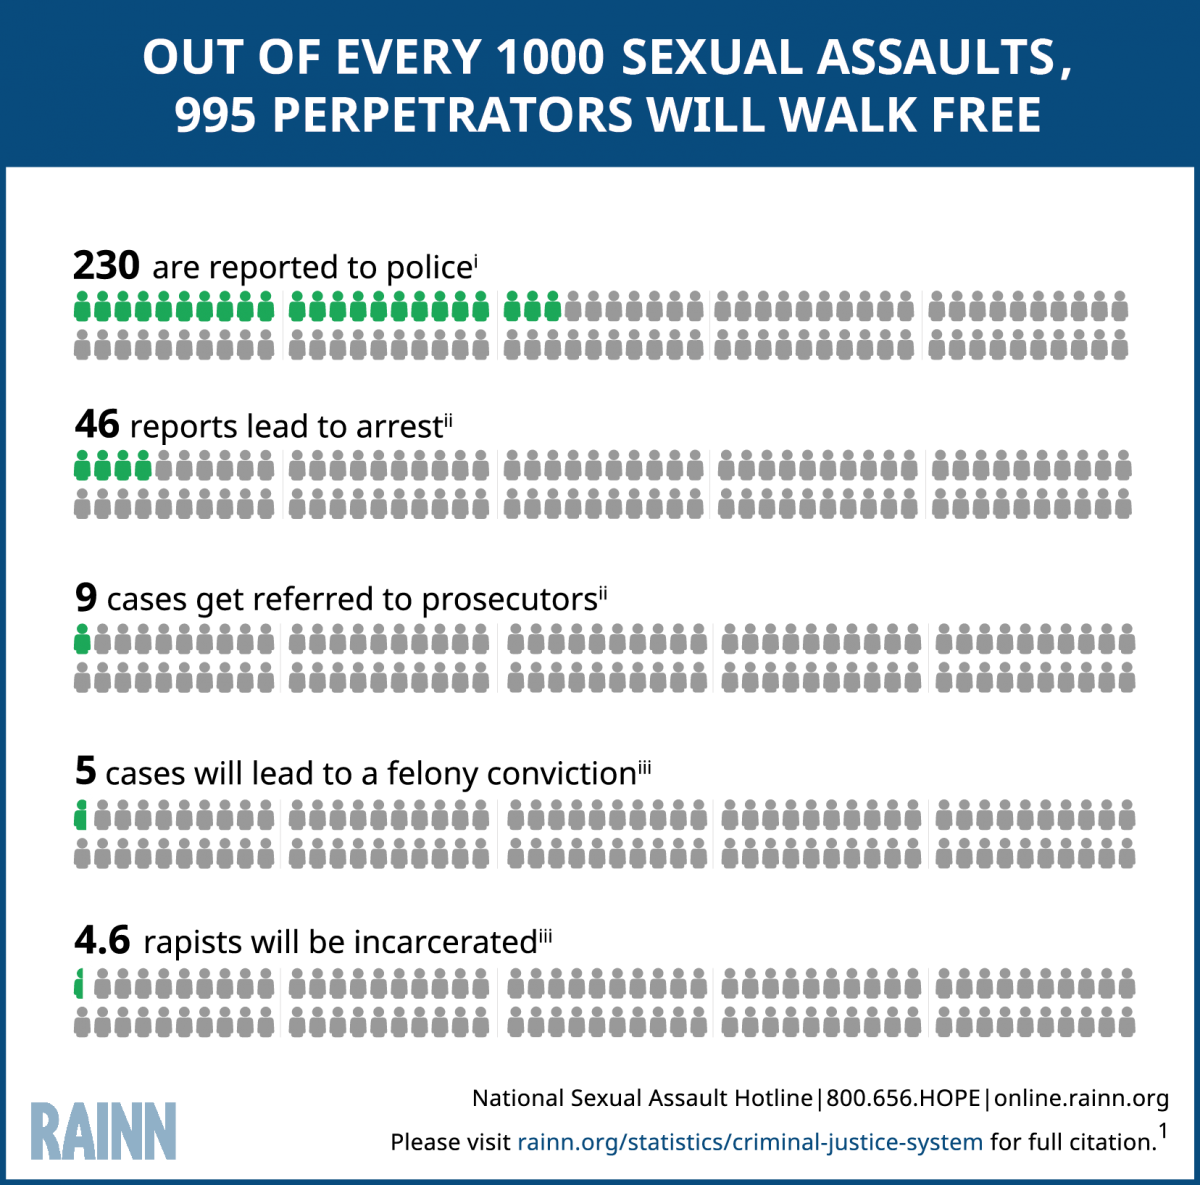 IMAGE(https://www.rainn.org/sites/default/files/Out_Of_1000_SexualAssaults_053019.png)